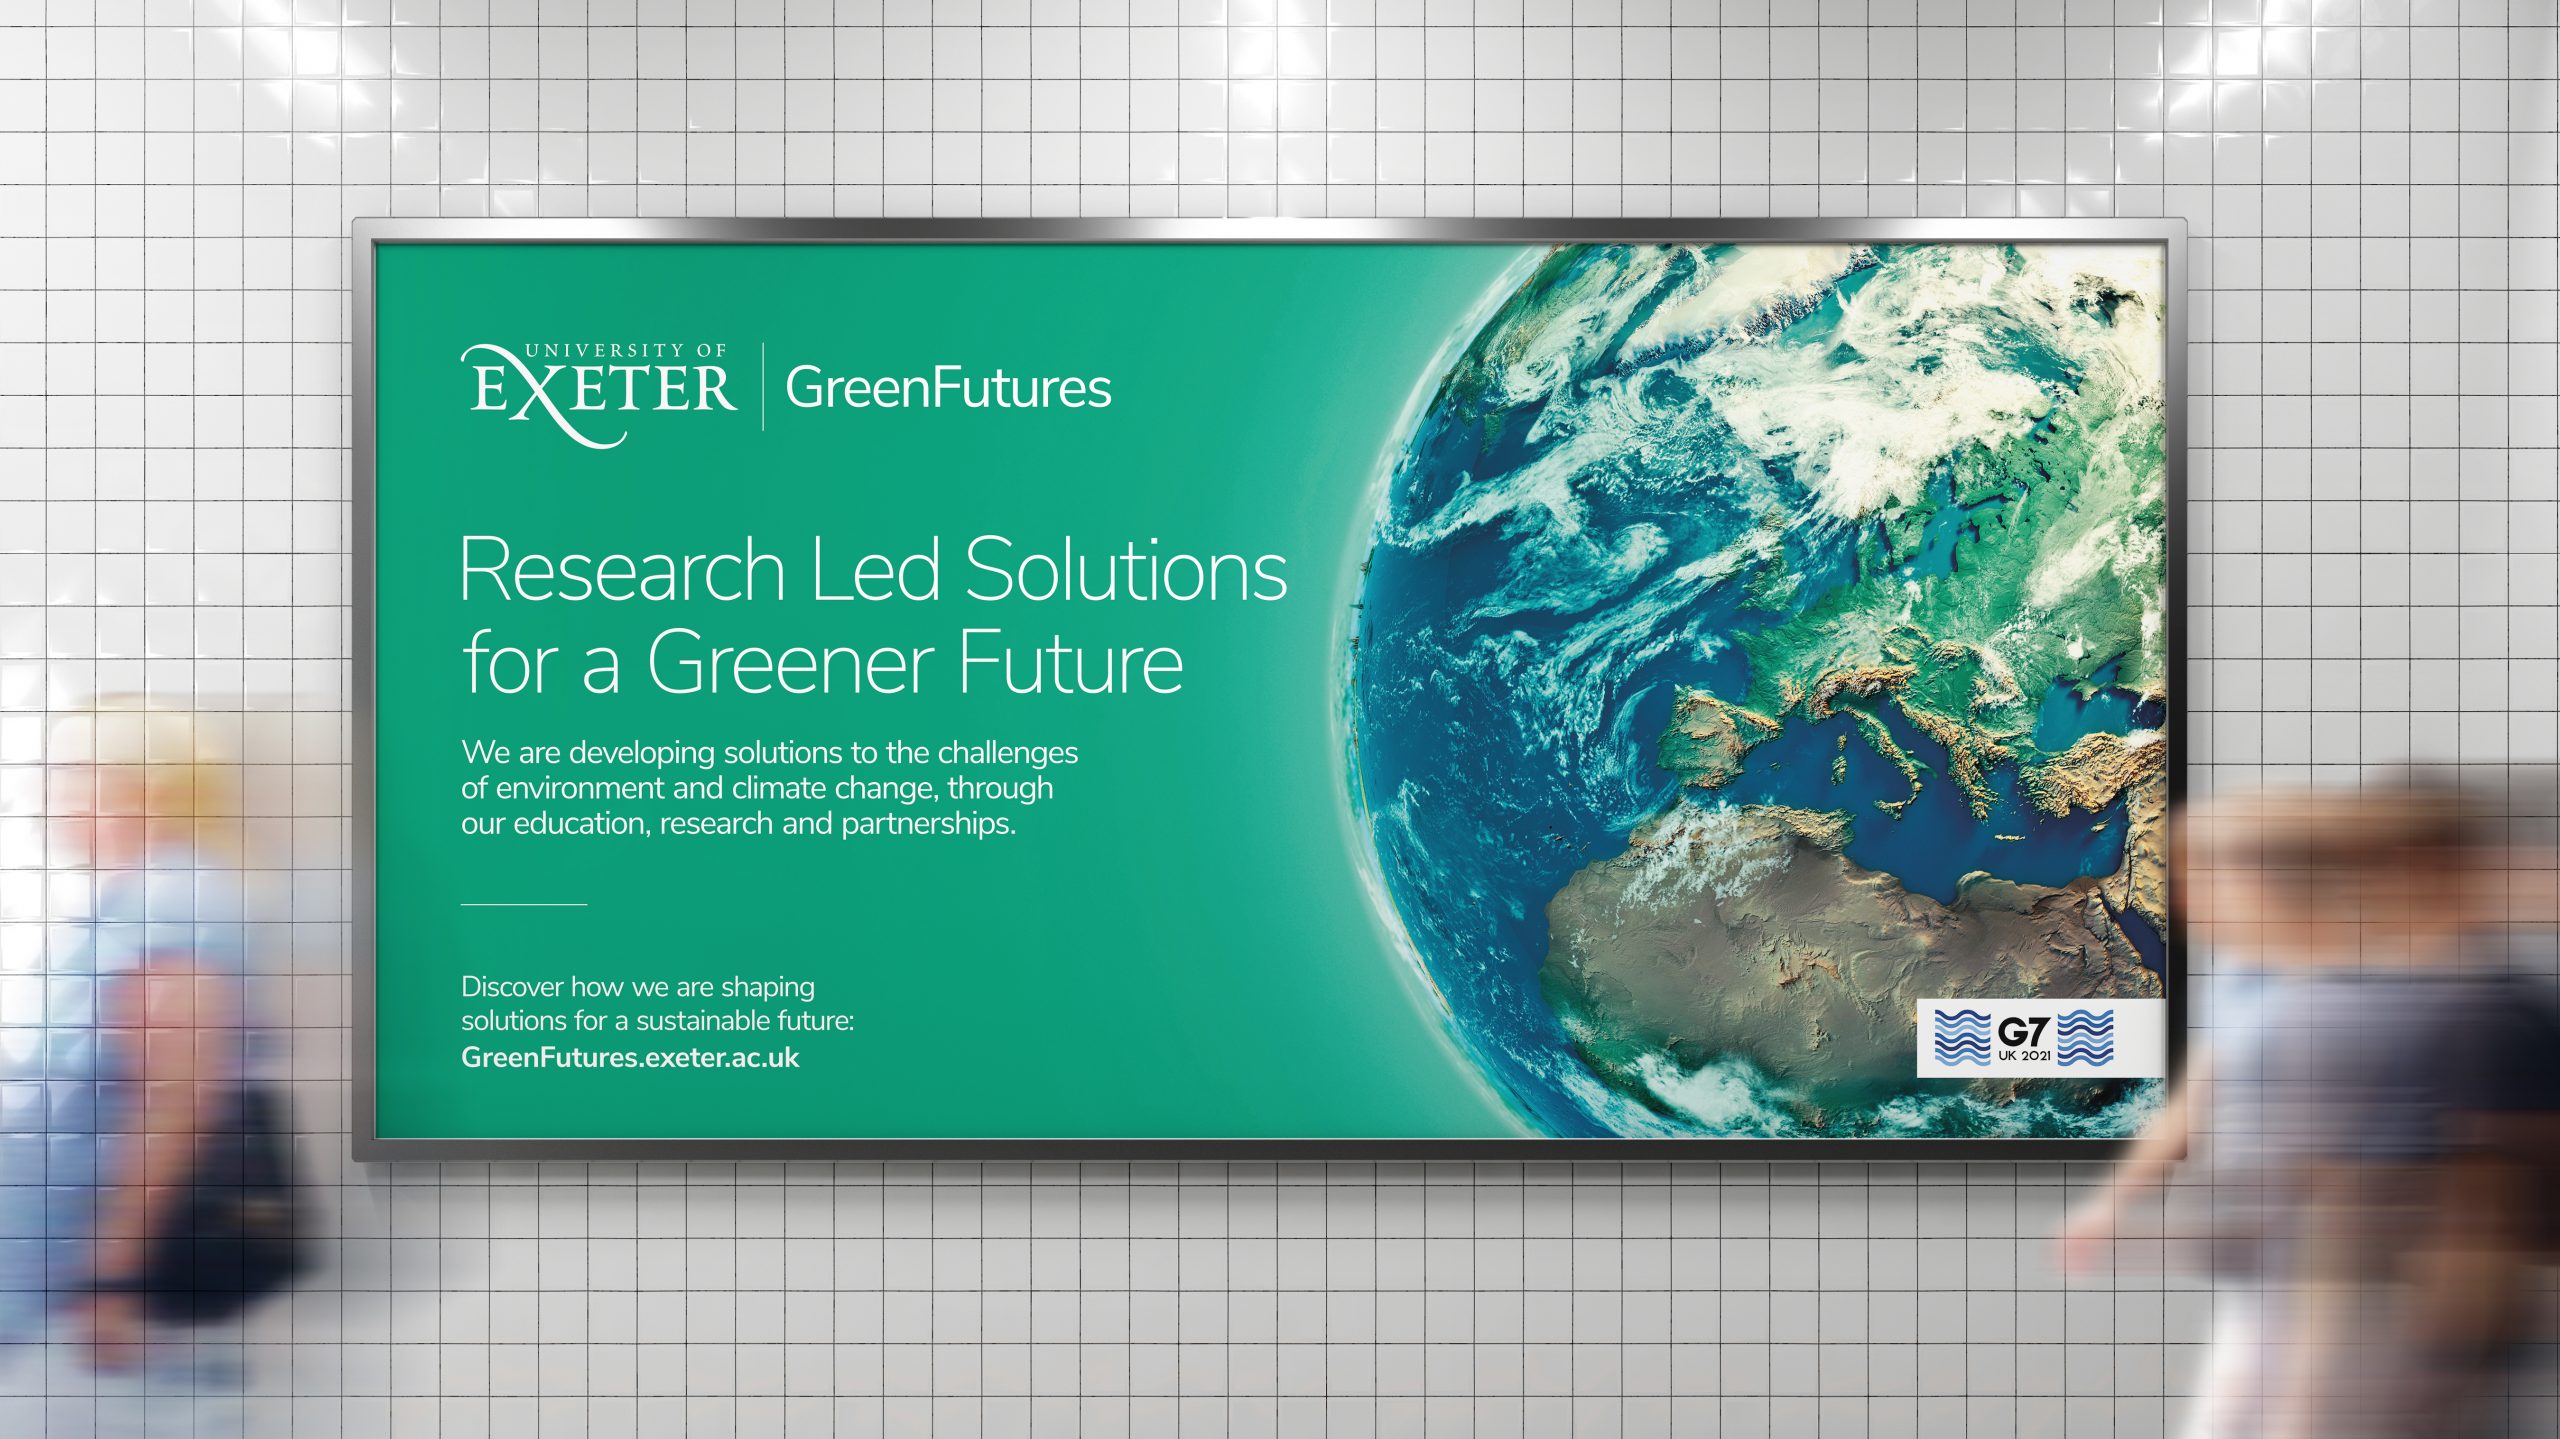 University of Exeter: Green Futures